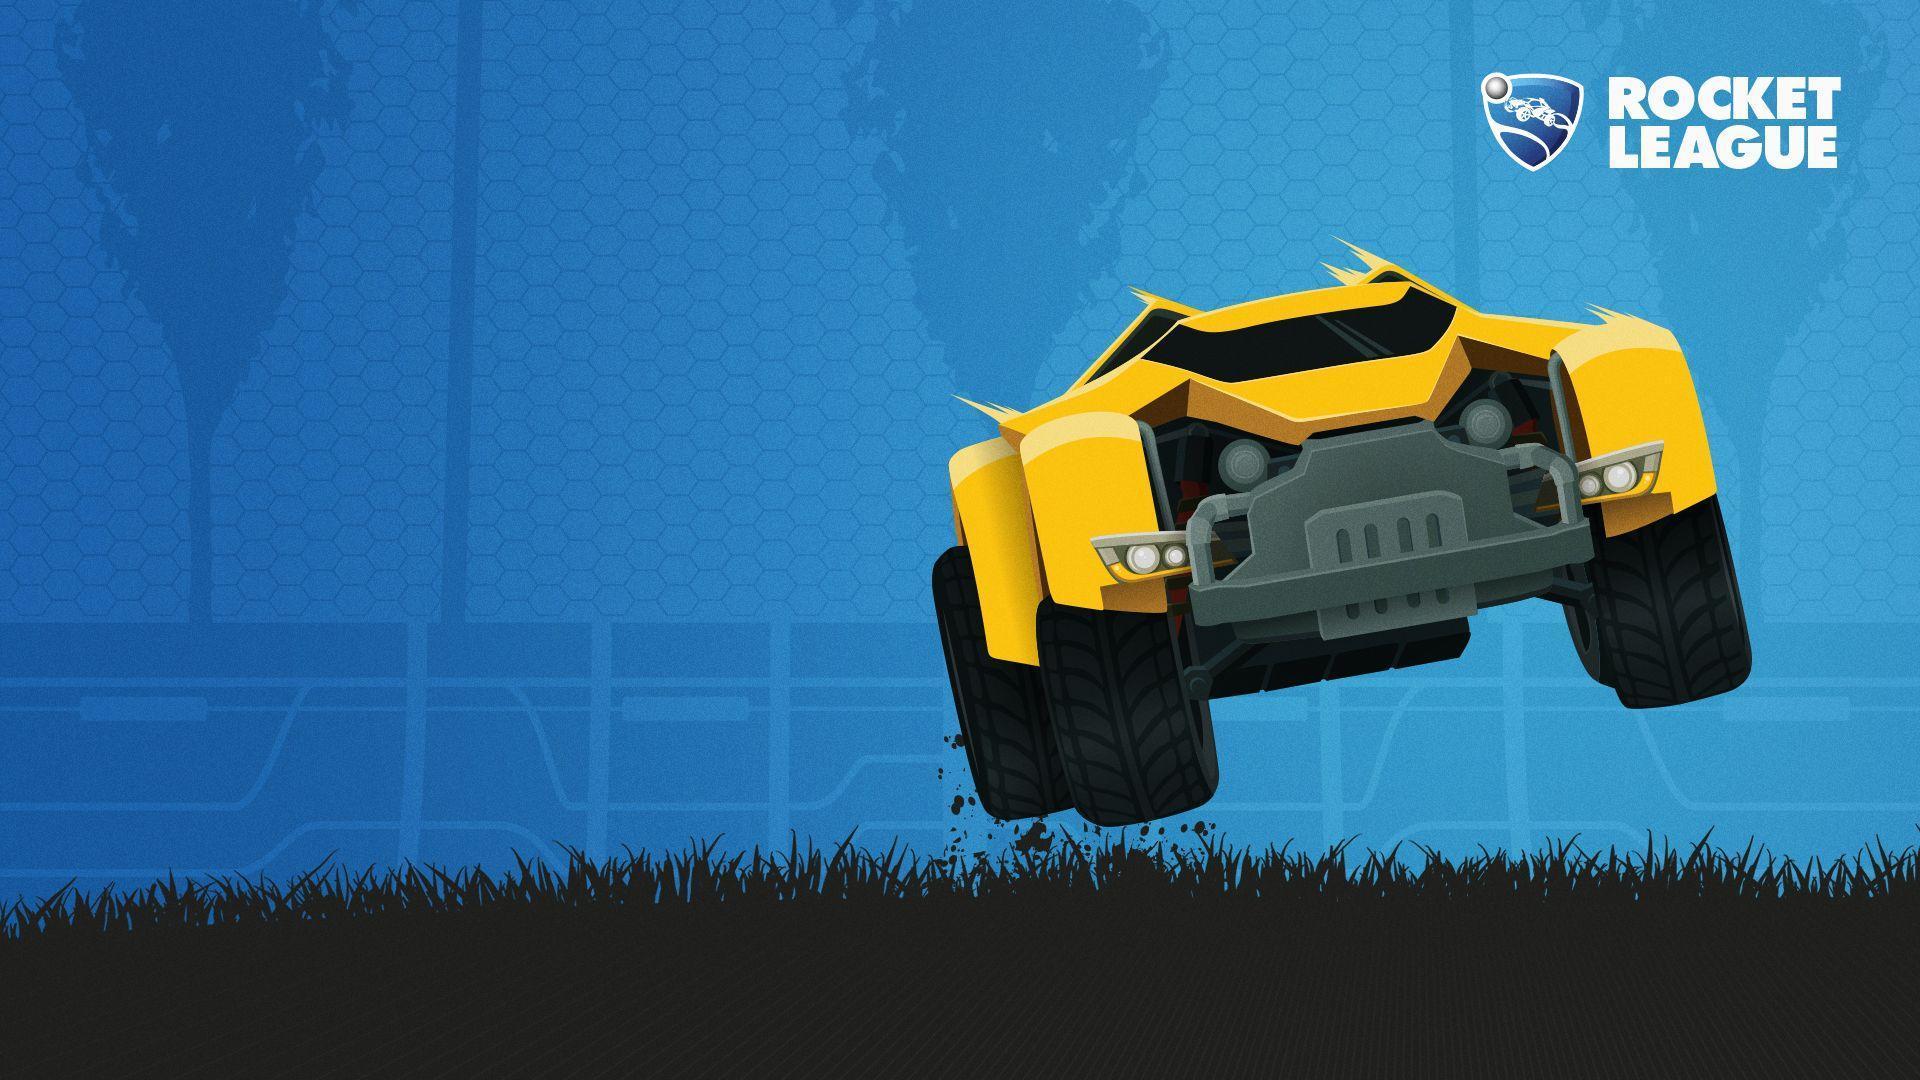 I made a Rocket League themed wallpaper for everyone